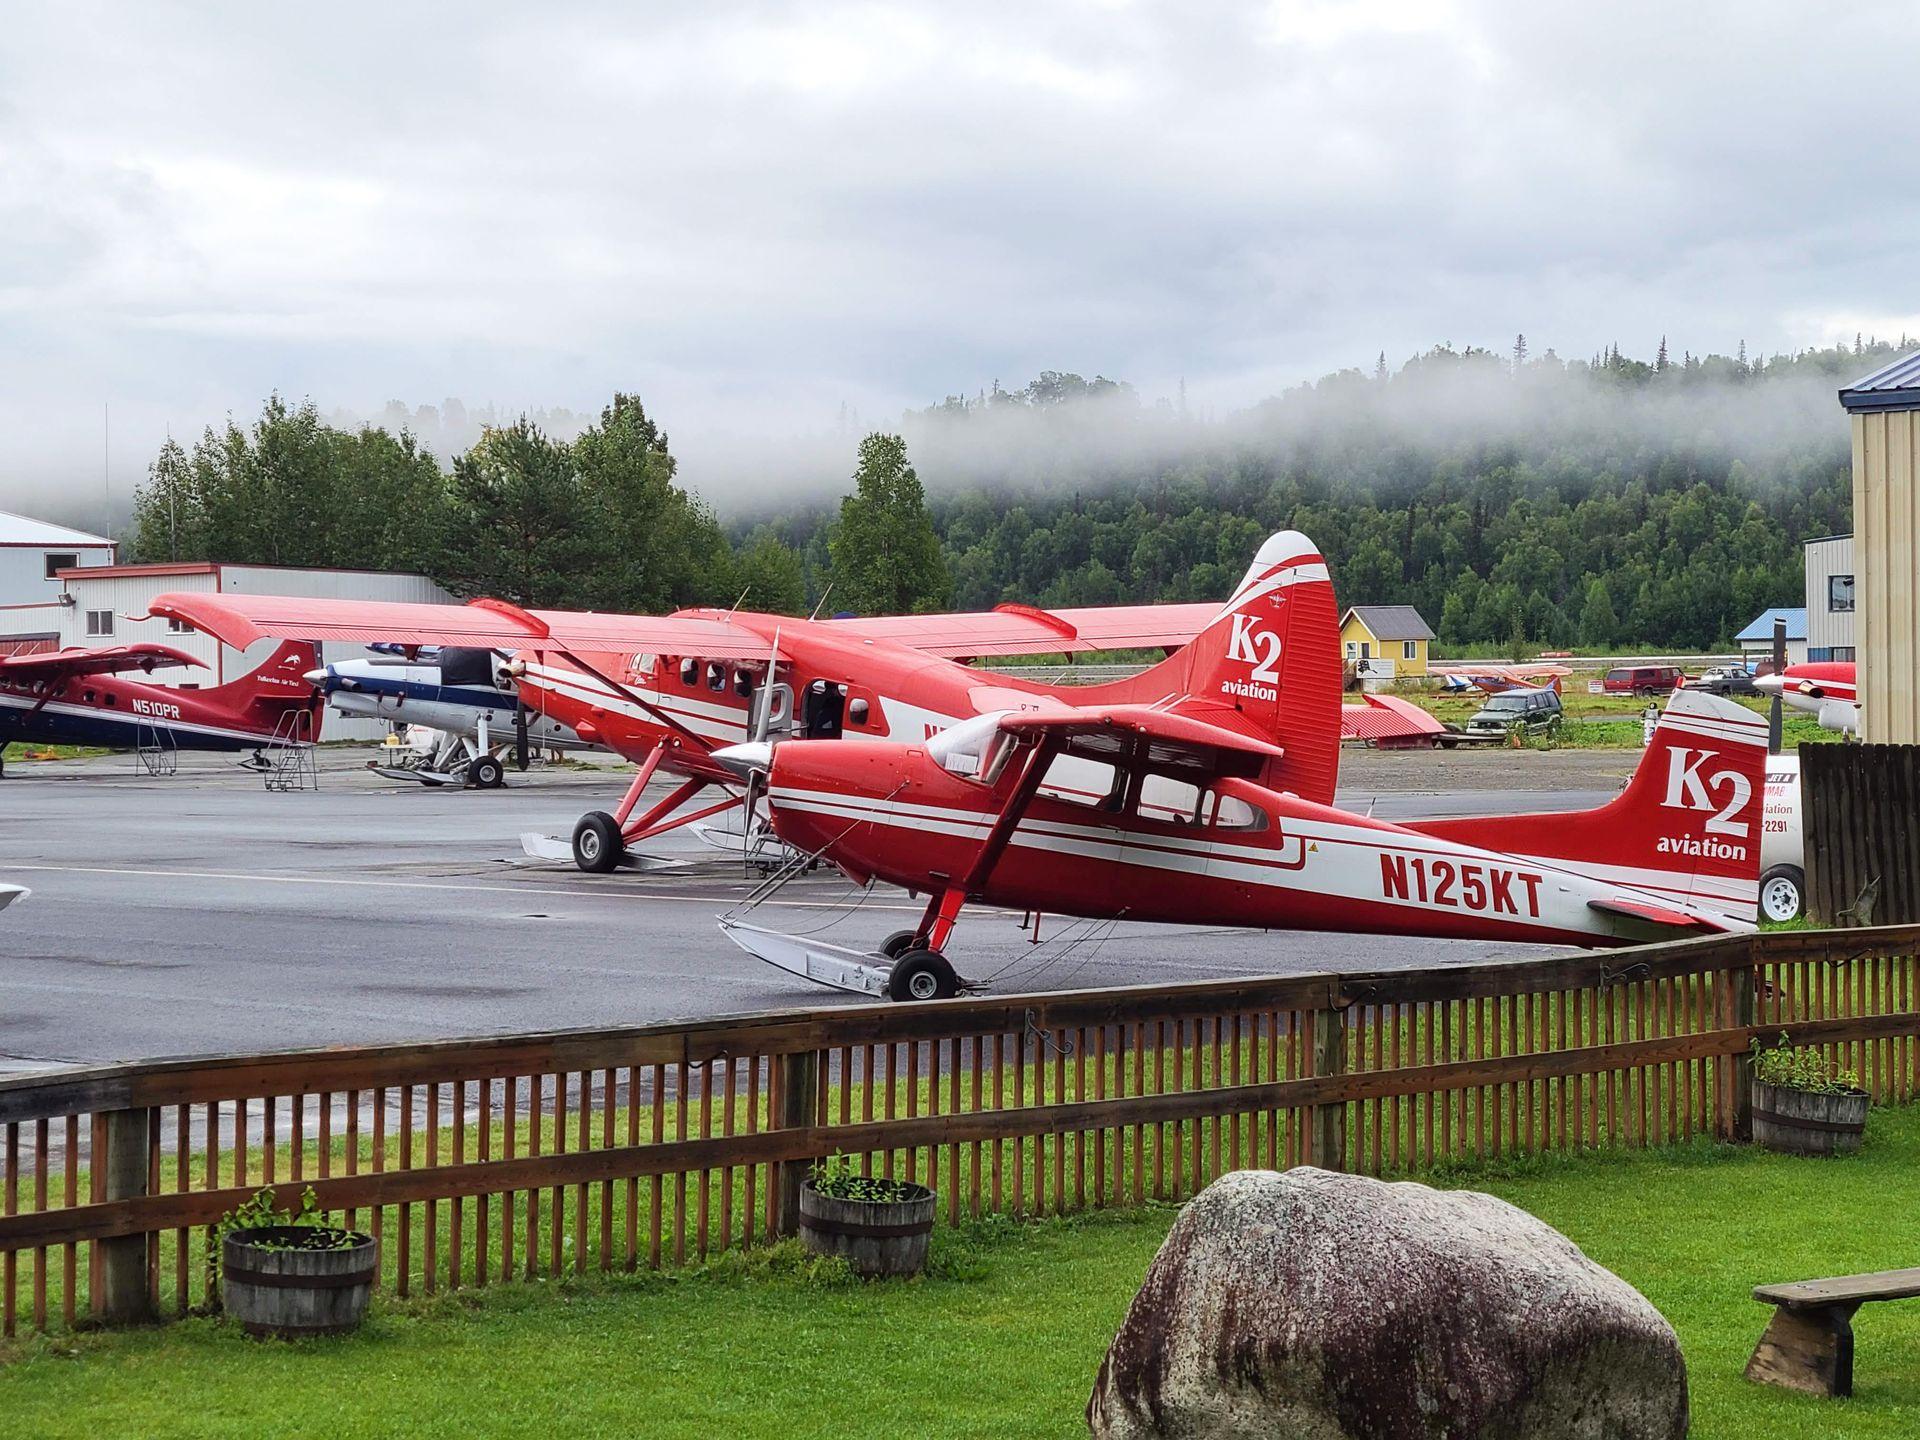 Red and white planes parked at K2 Aviation